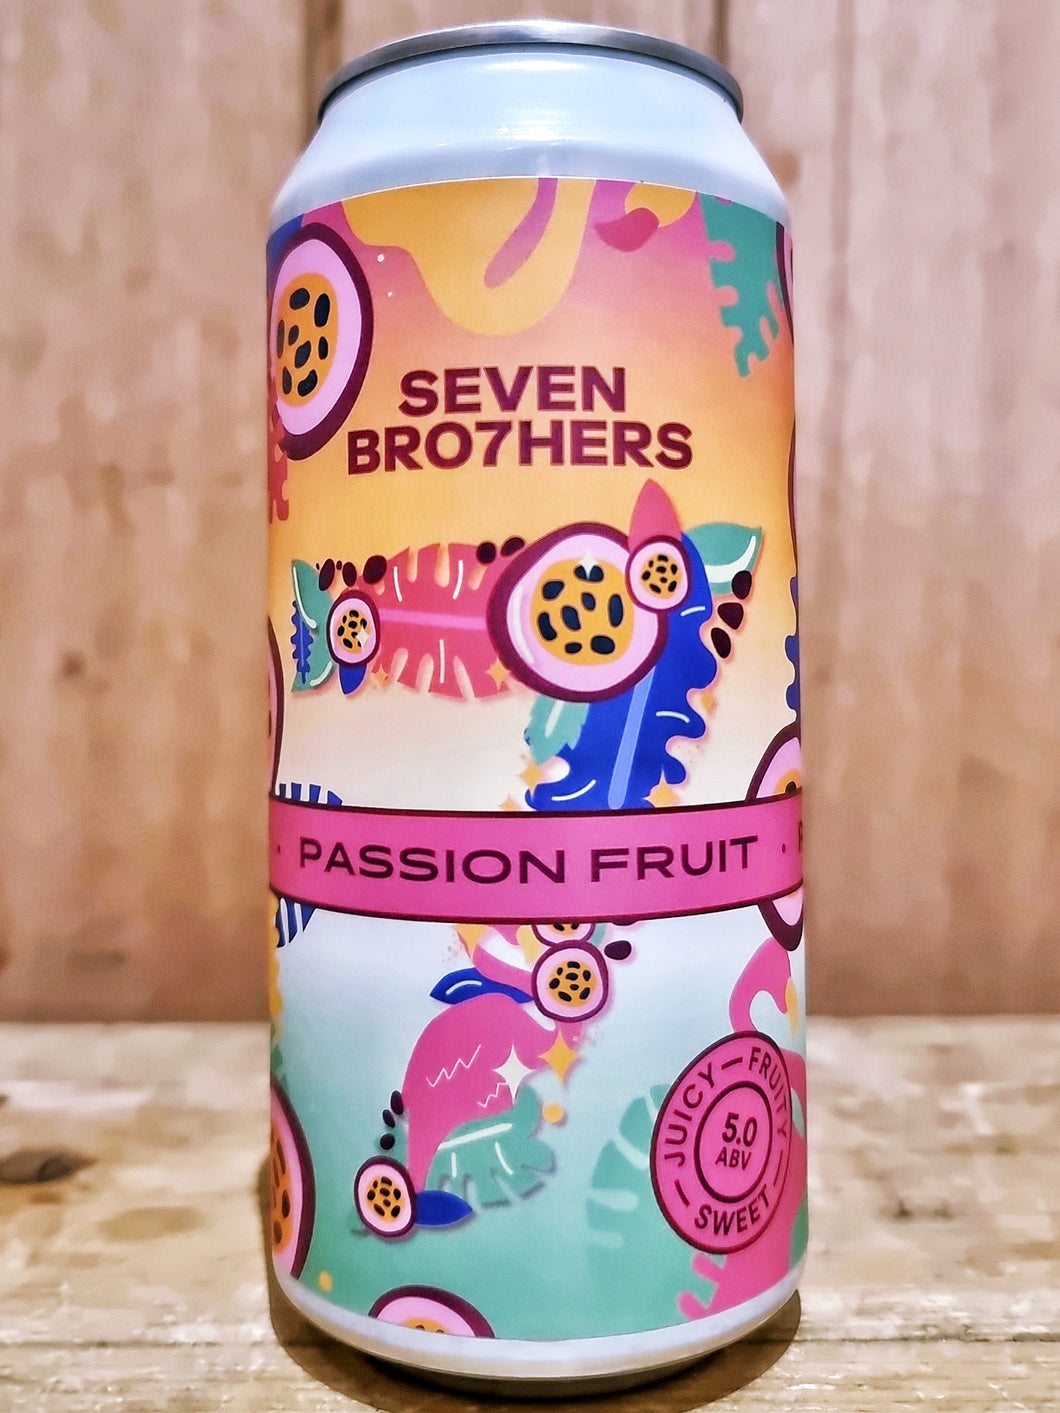 Seven Bro7hers - Passion Fruit